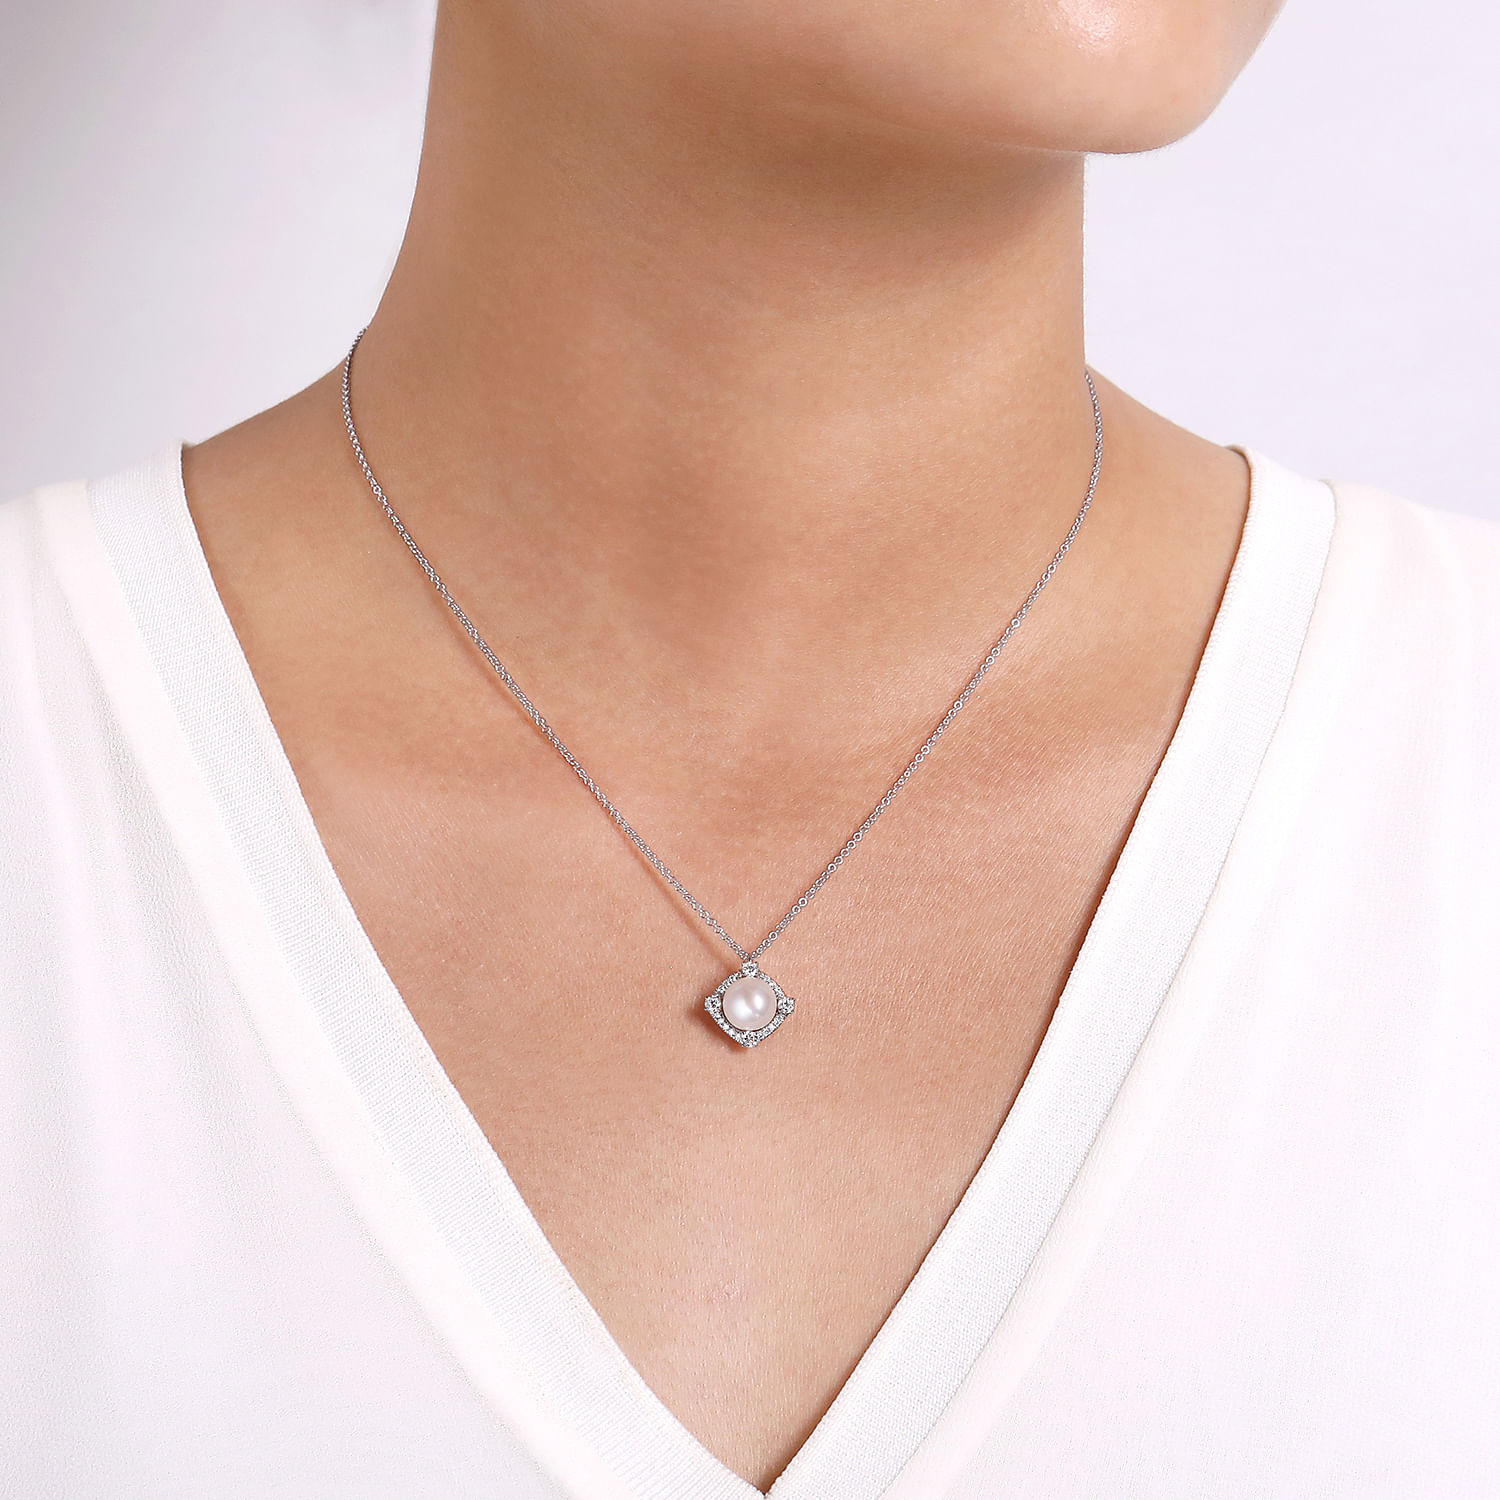 14K White Gold Cultured Pearl Pendant Necklace with Diamond Halo